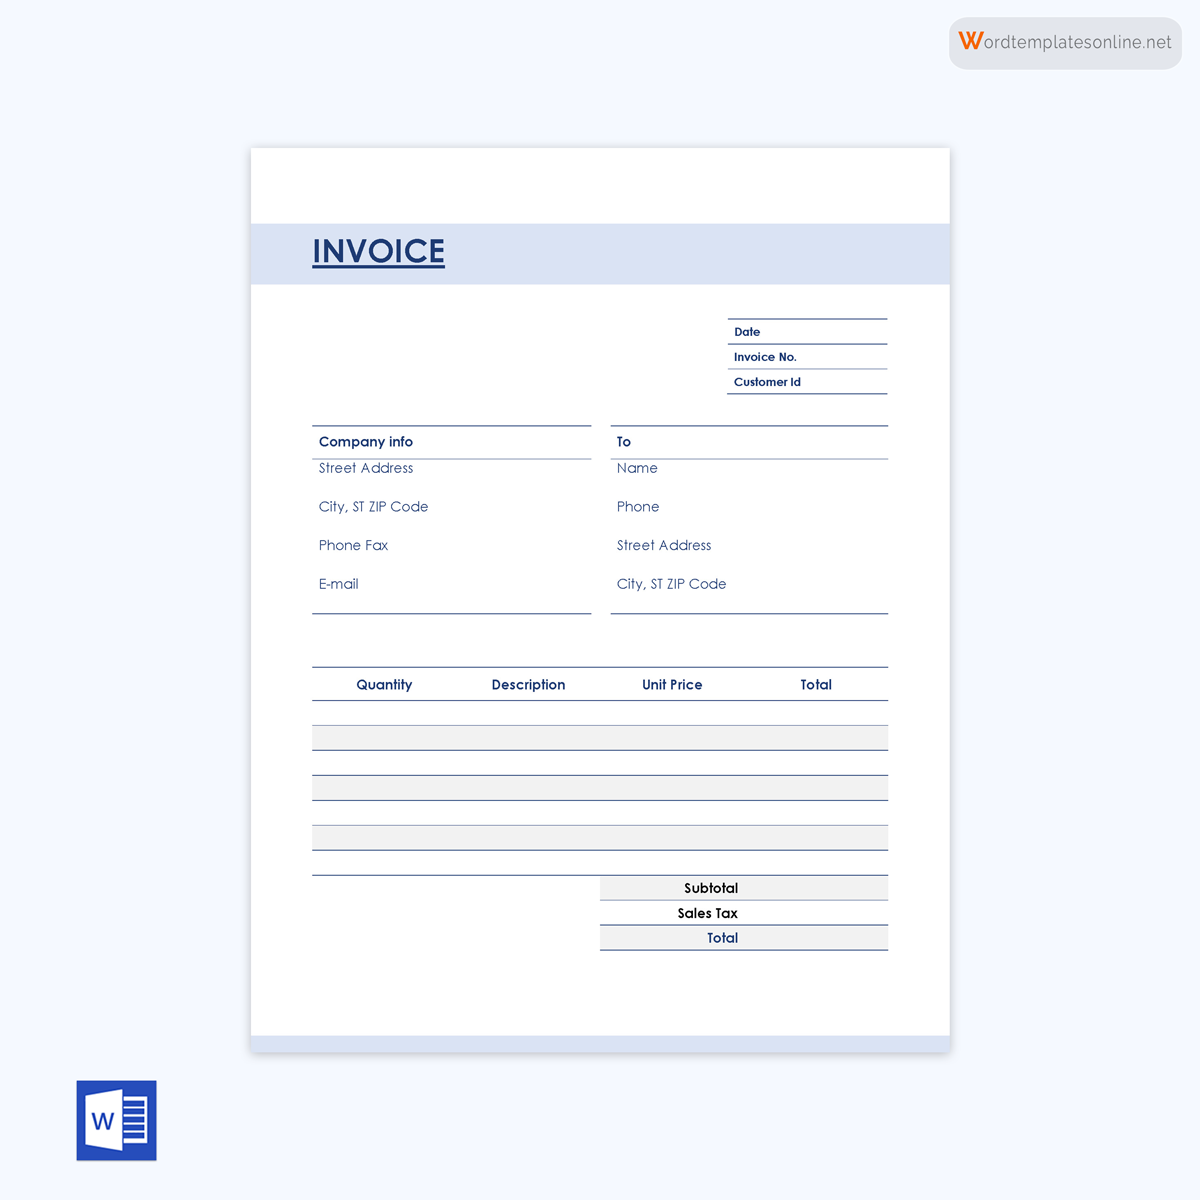 Printable invoice template example for download